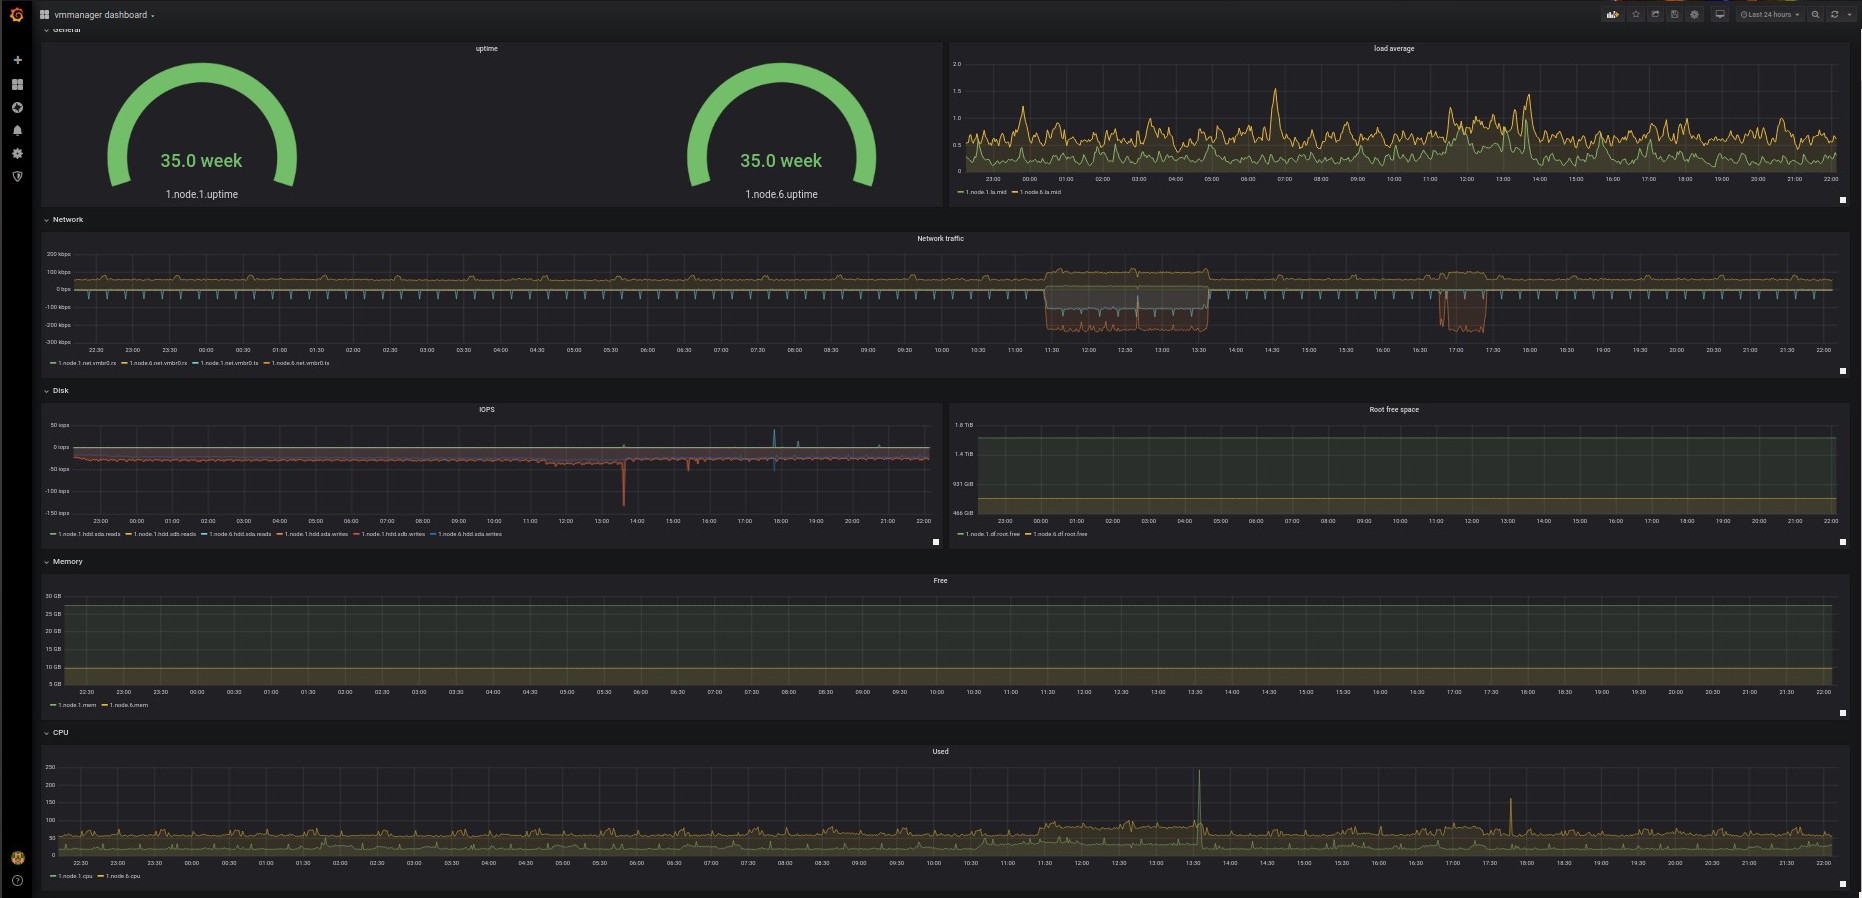 The pre-configured dashboard in Grafana. No integration is required to get started. The administrator just needs to select the metrics he wants to visualize 